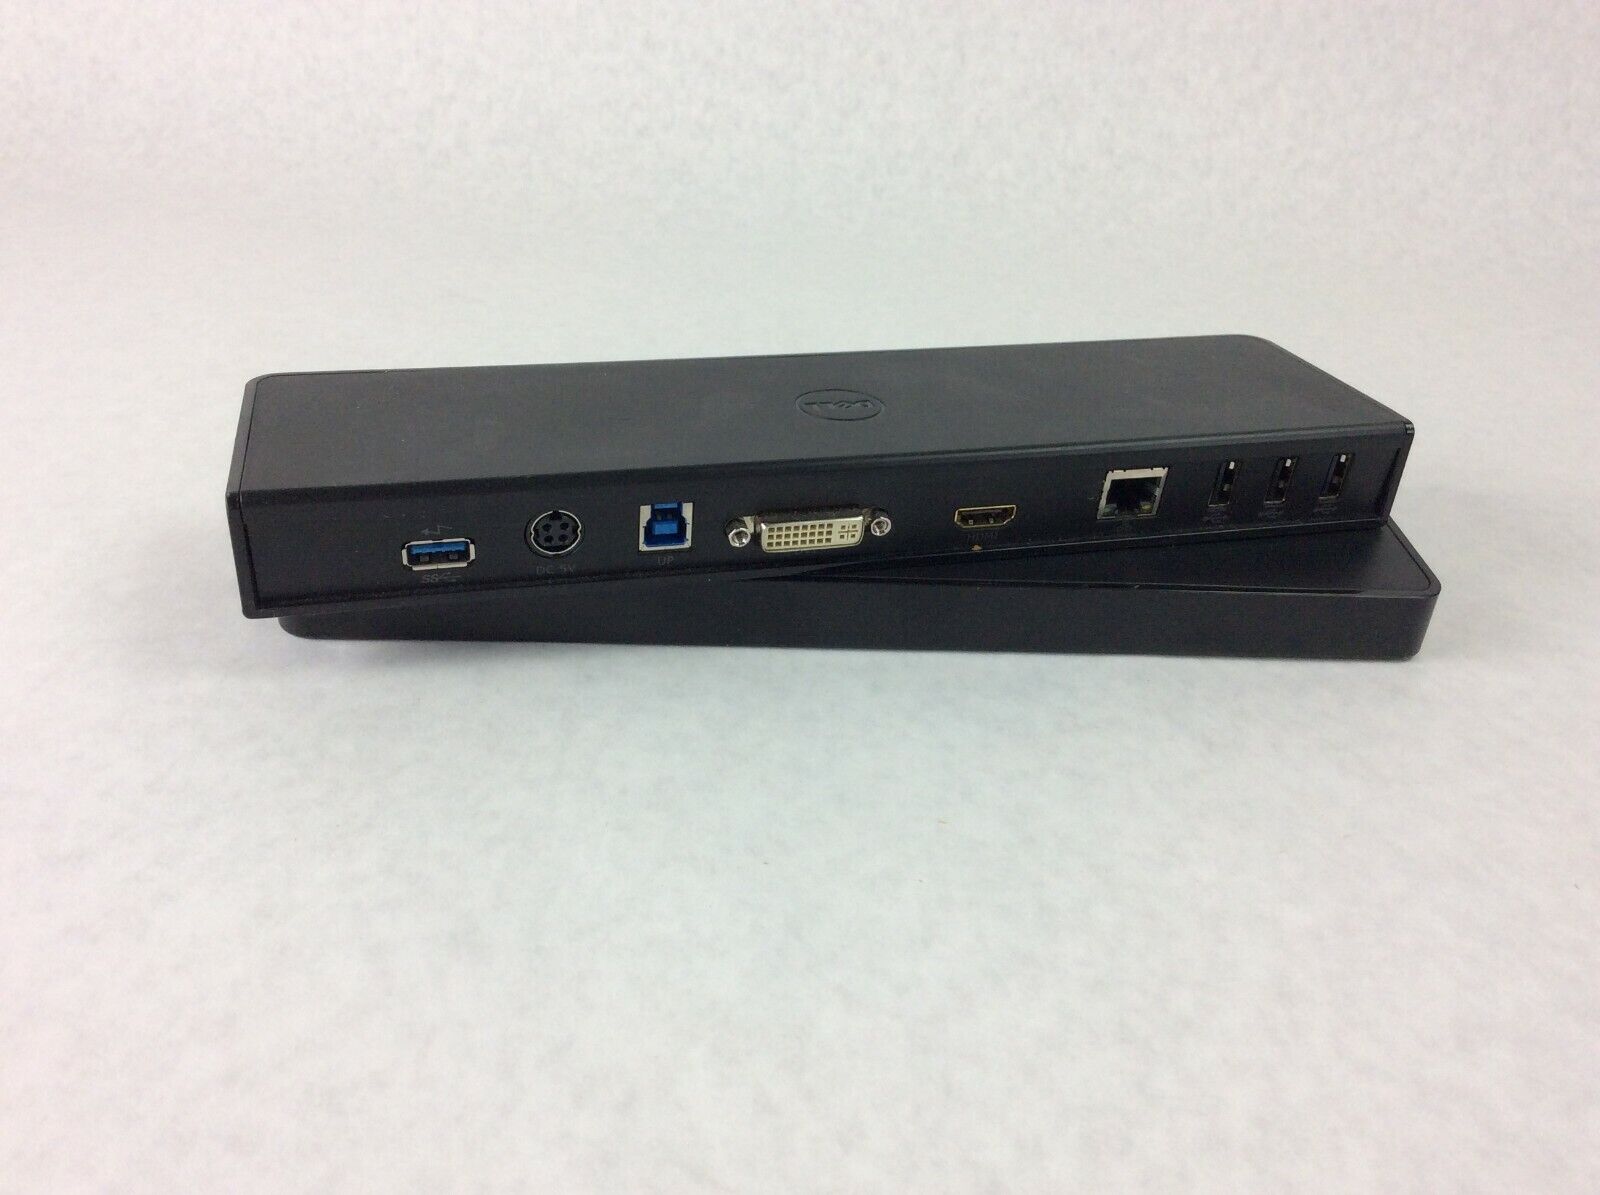 Lot of 2 Dell D3000 SuperSpeed USB 3.0 HDMI DVI Laptop Docking Station